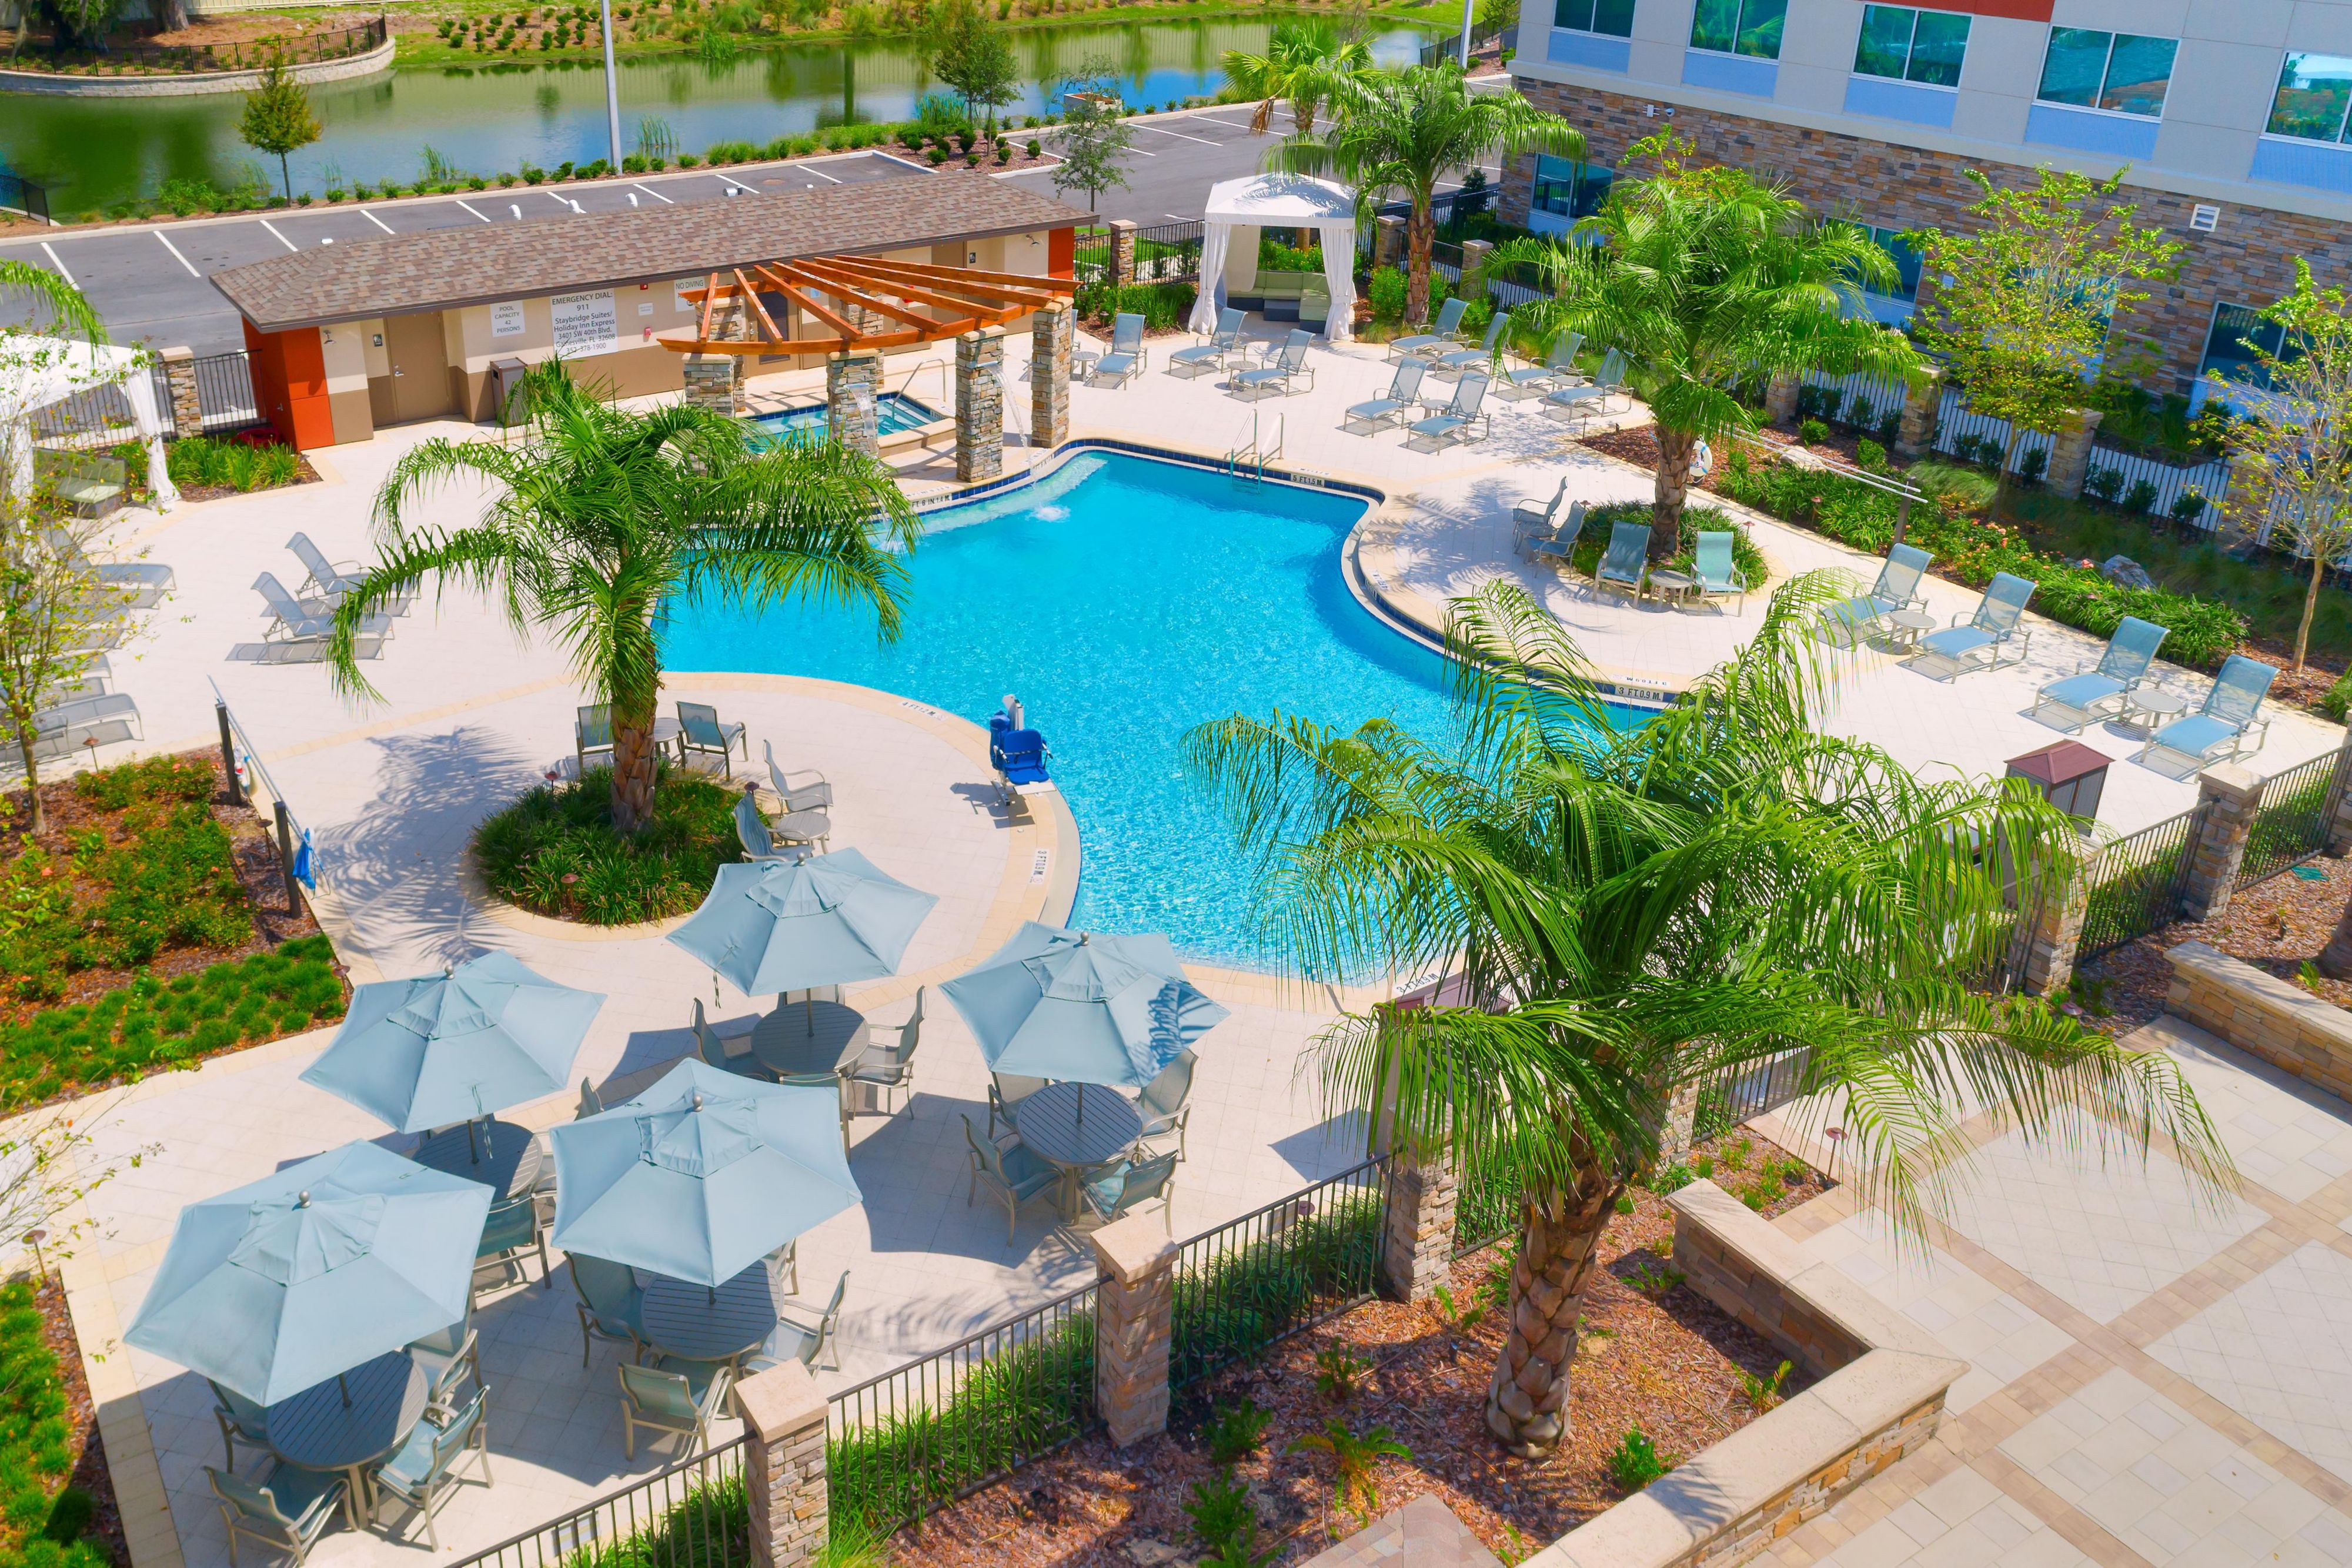 The brand new Staybridge Suites offers a large resort style pool and spa area with 2 cabanas, 3 grills, fire pit, lots of outdoor seating for eating, relaxing or social gatherings